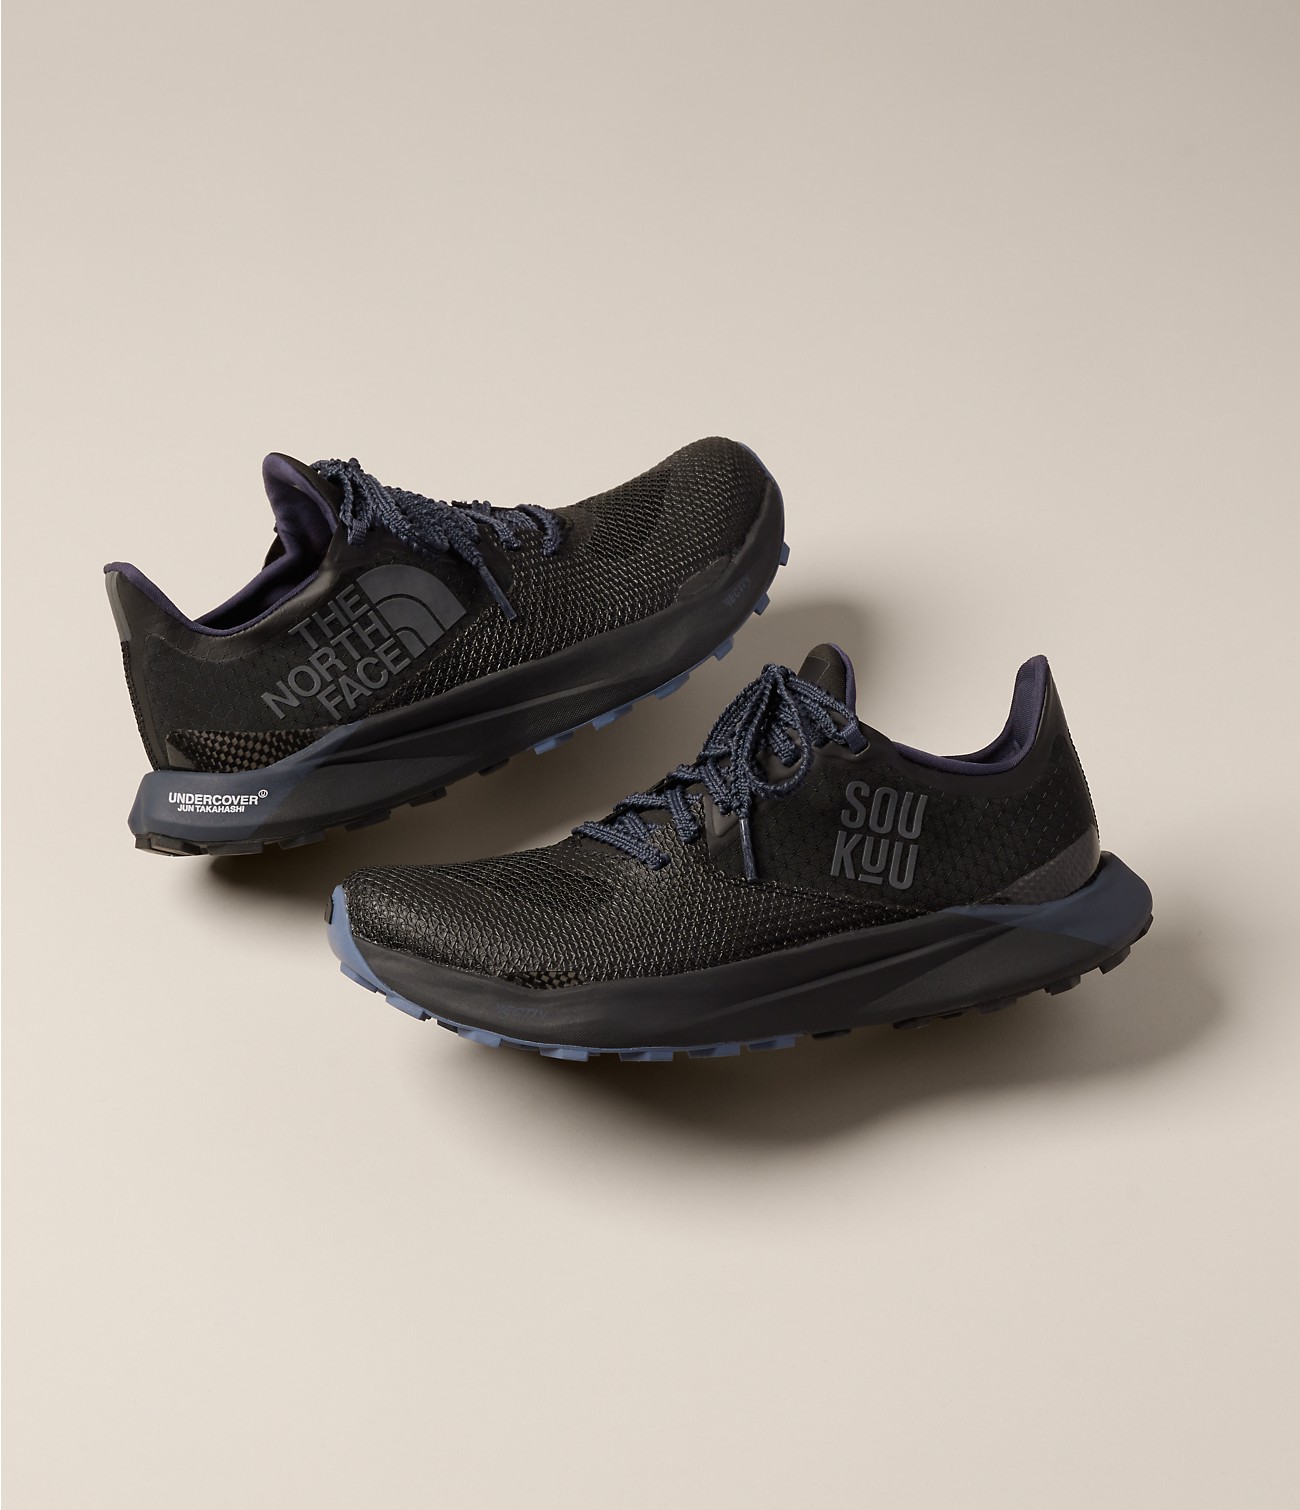 The North Face x UNDERCOVER SOUKUU VECTIV Sky Shoes |